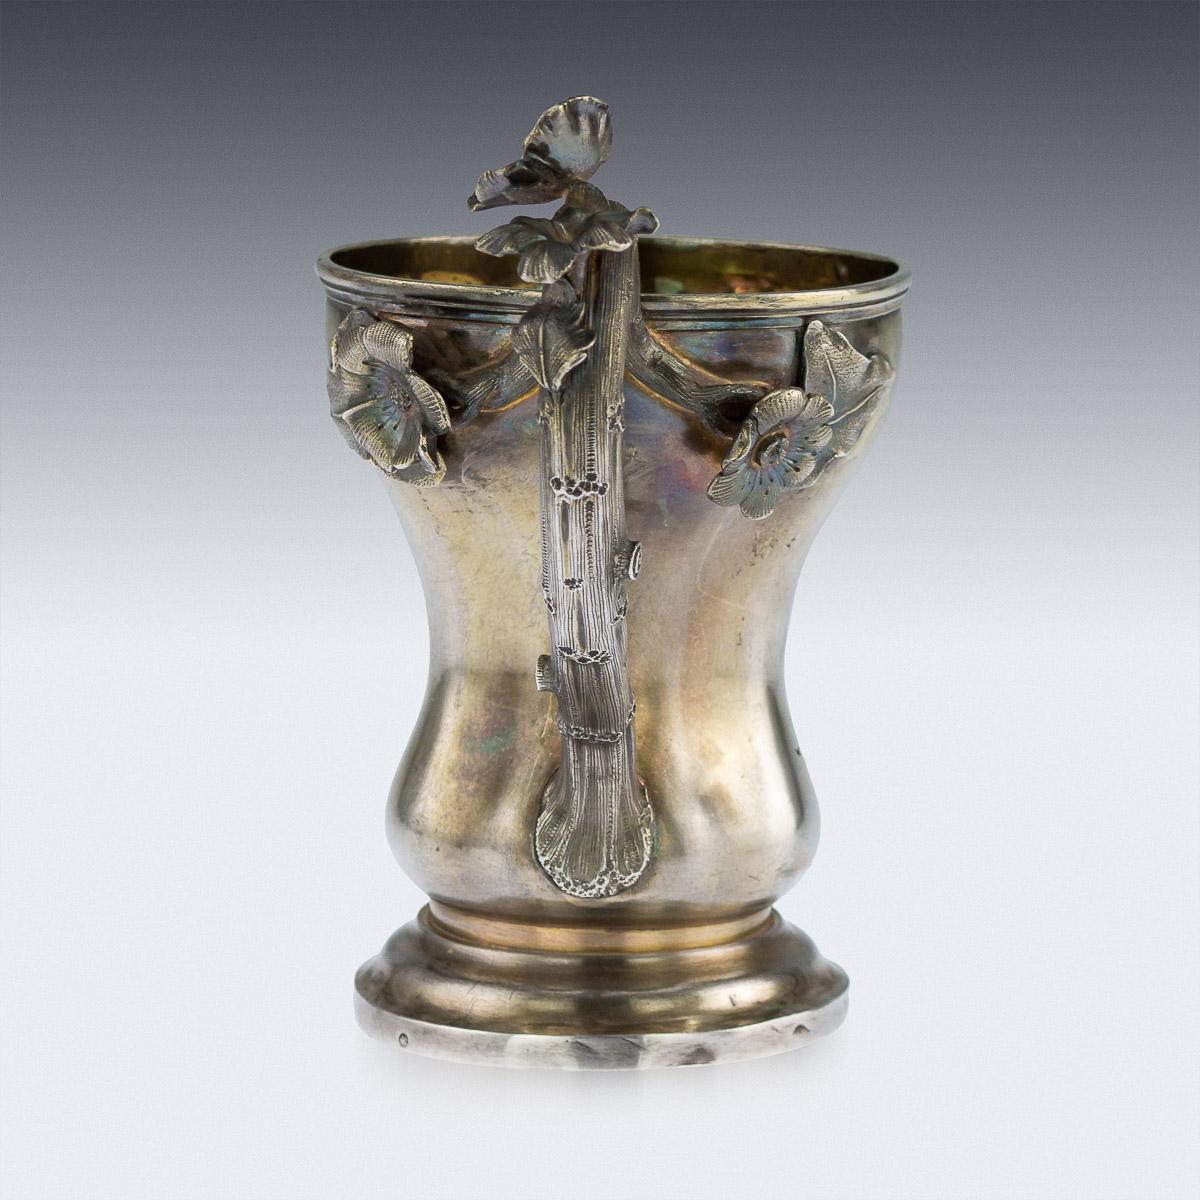 Antique mid-19th century Russian solid silver-gilt cup, of inverted pair shape, decorated with large scrolled shields with a vacant catrouche, the handle realistically modelled as a vine branch, applied with leaves and flowers, standing on a wide